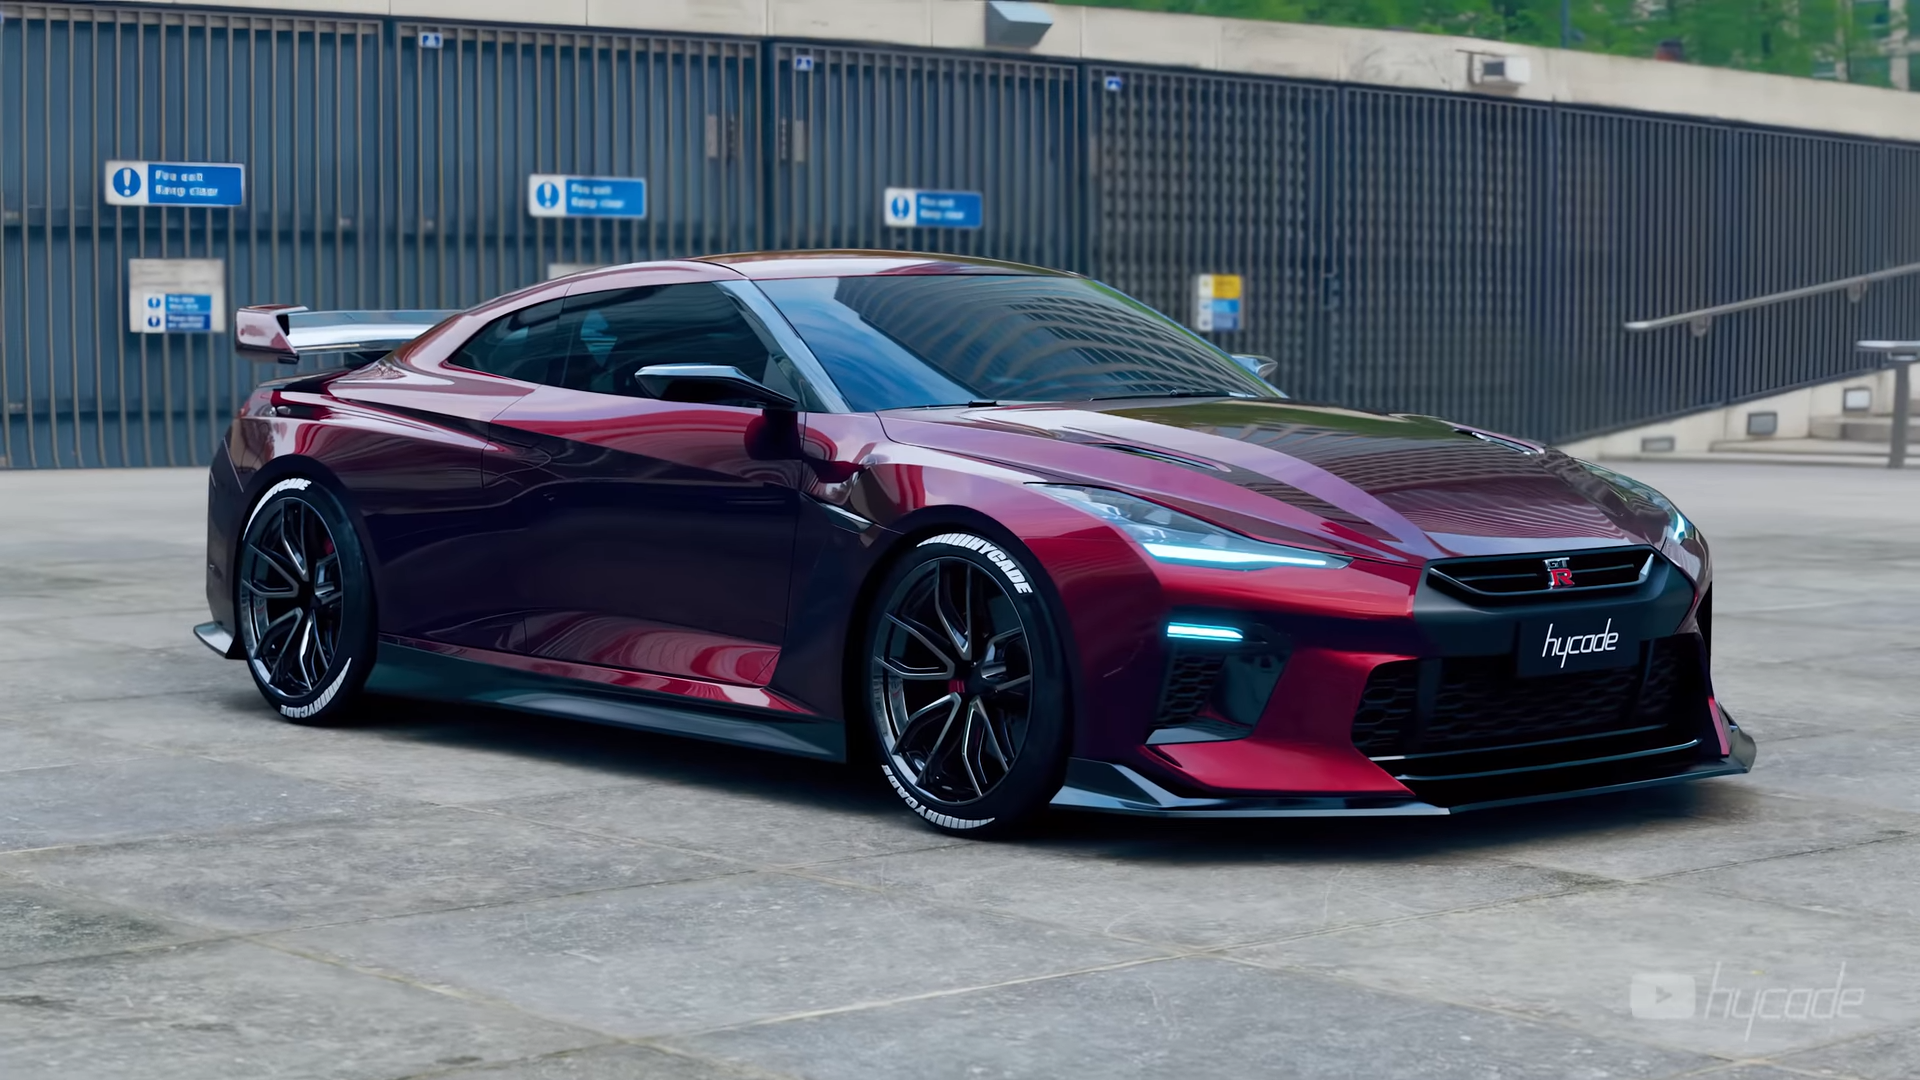 Nissan GT-R R36 2023 Custom Wide Body Kit by Hycade Buy with